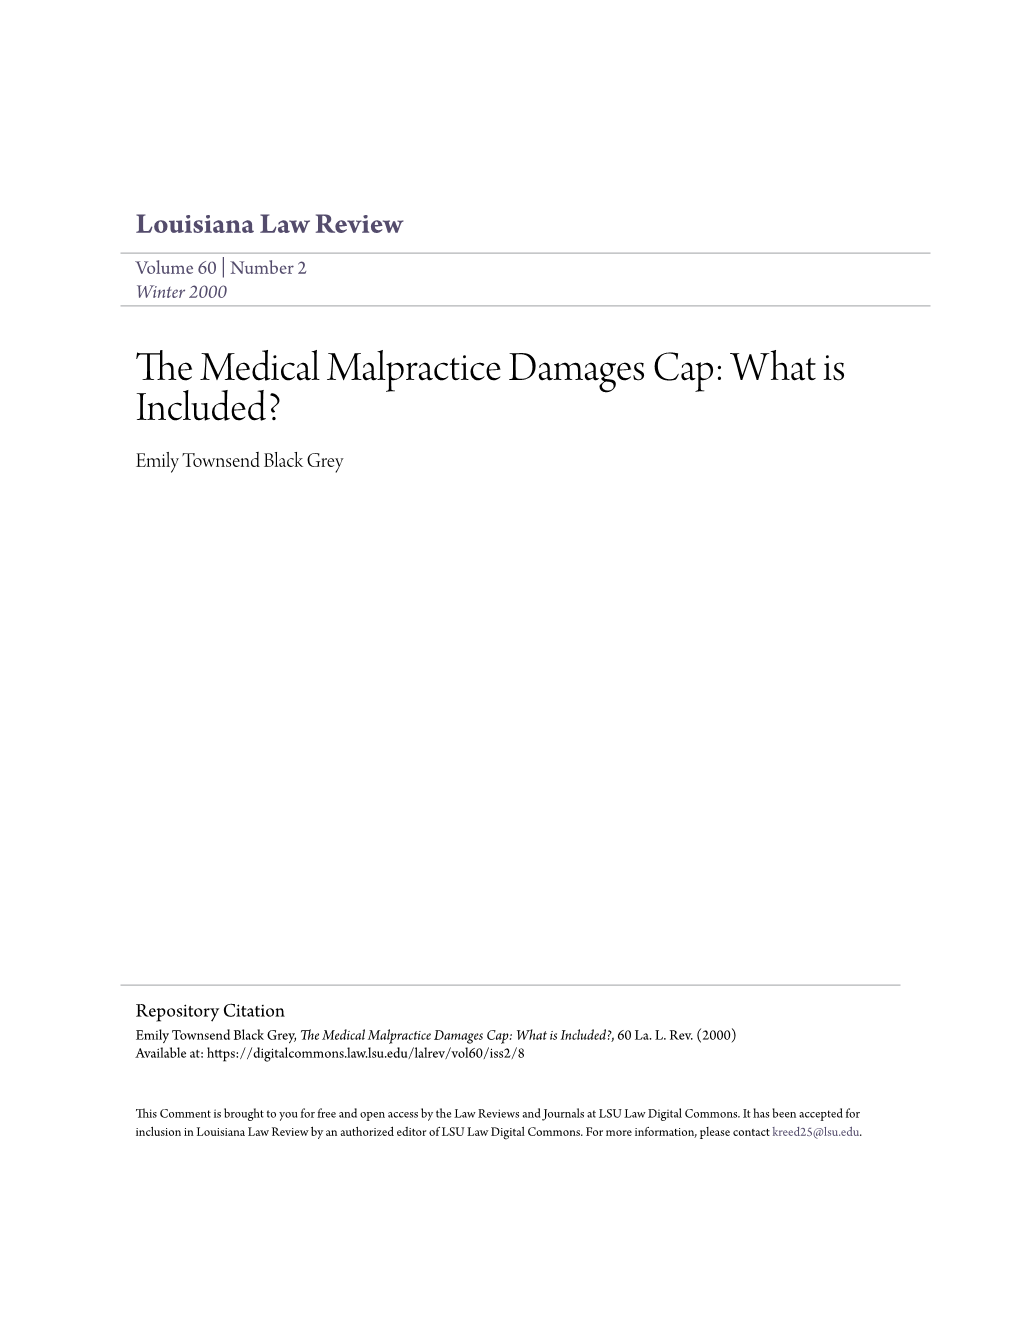 The Medical Malpractice Damages Cap: What Is Included?, 60 La